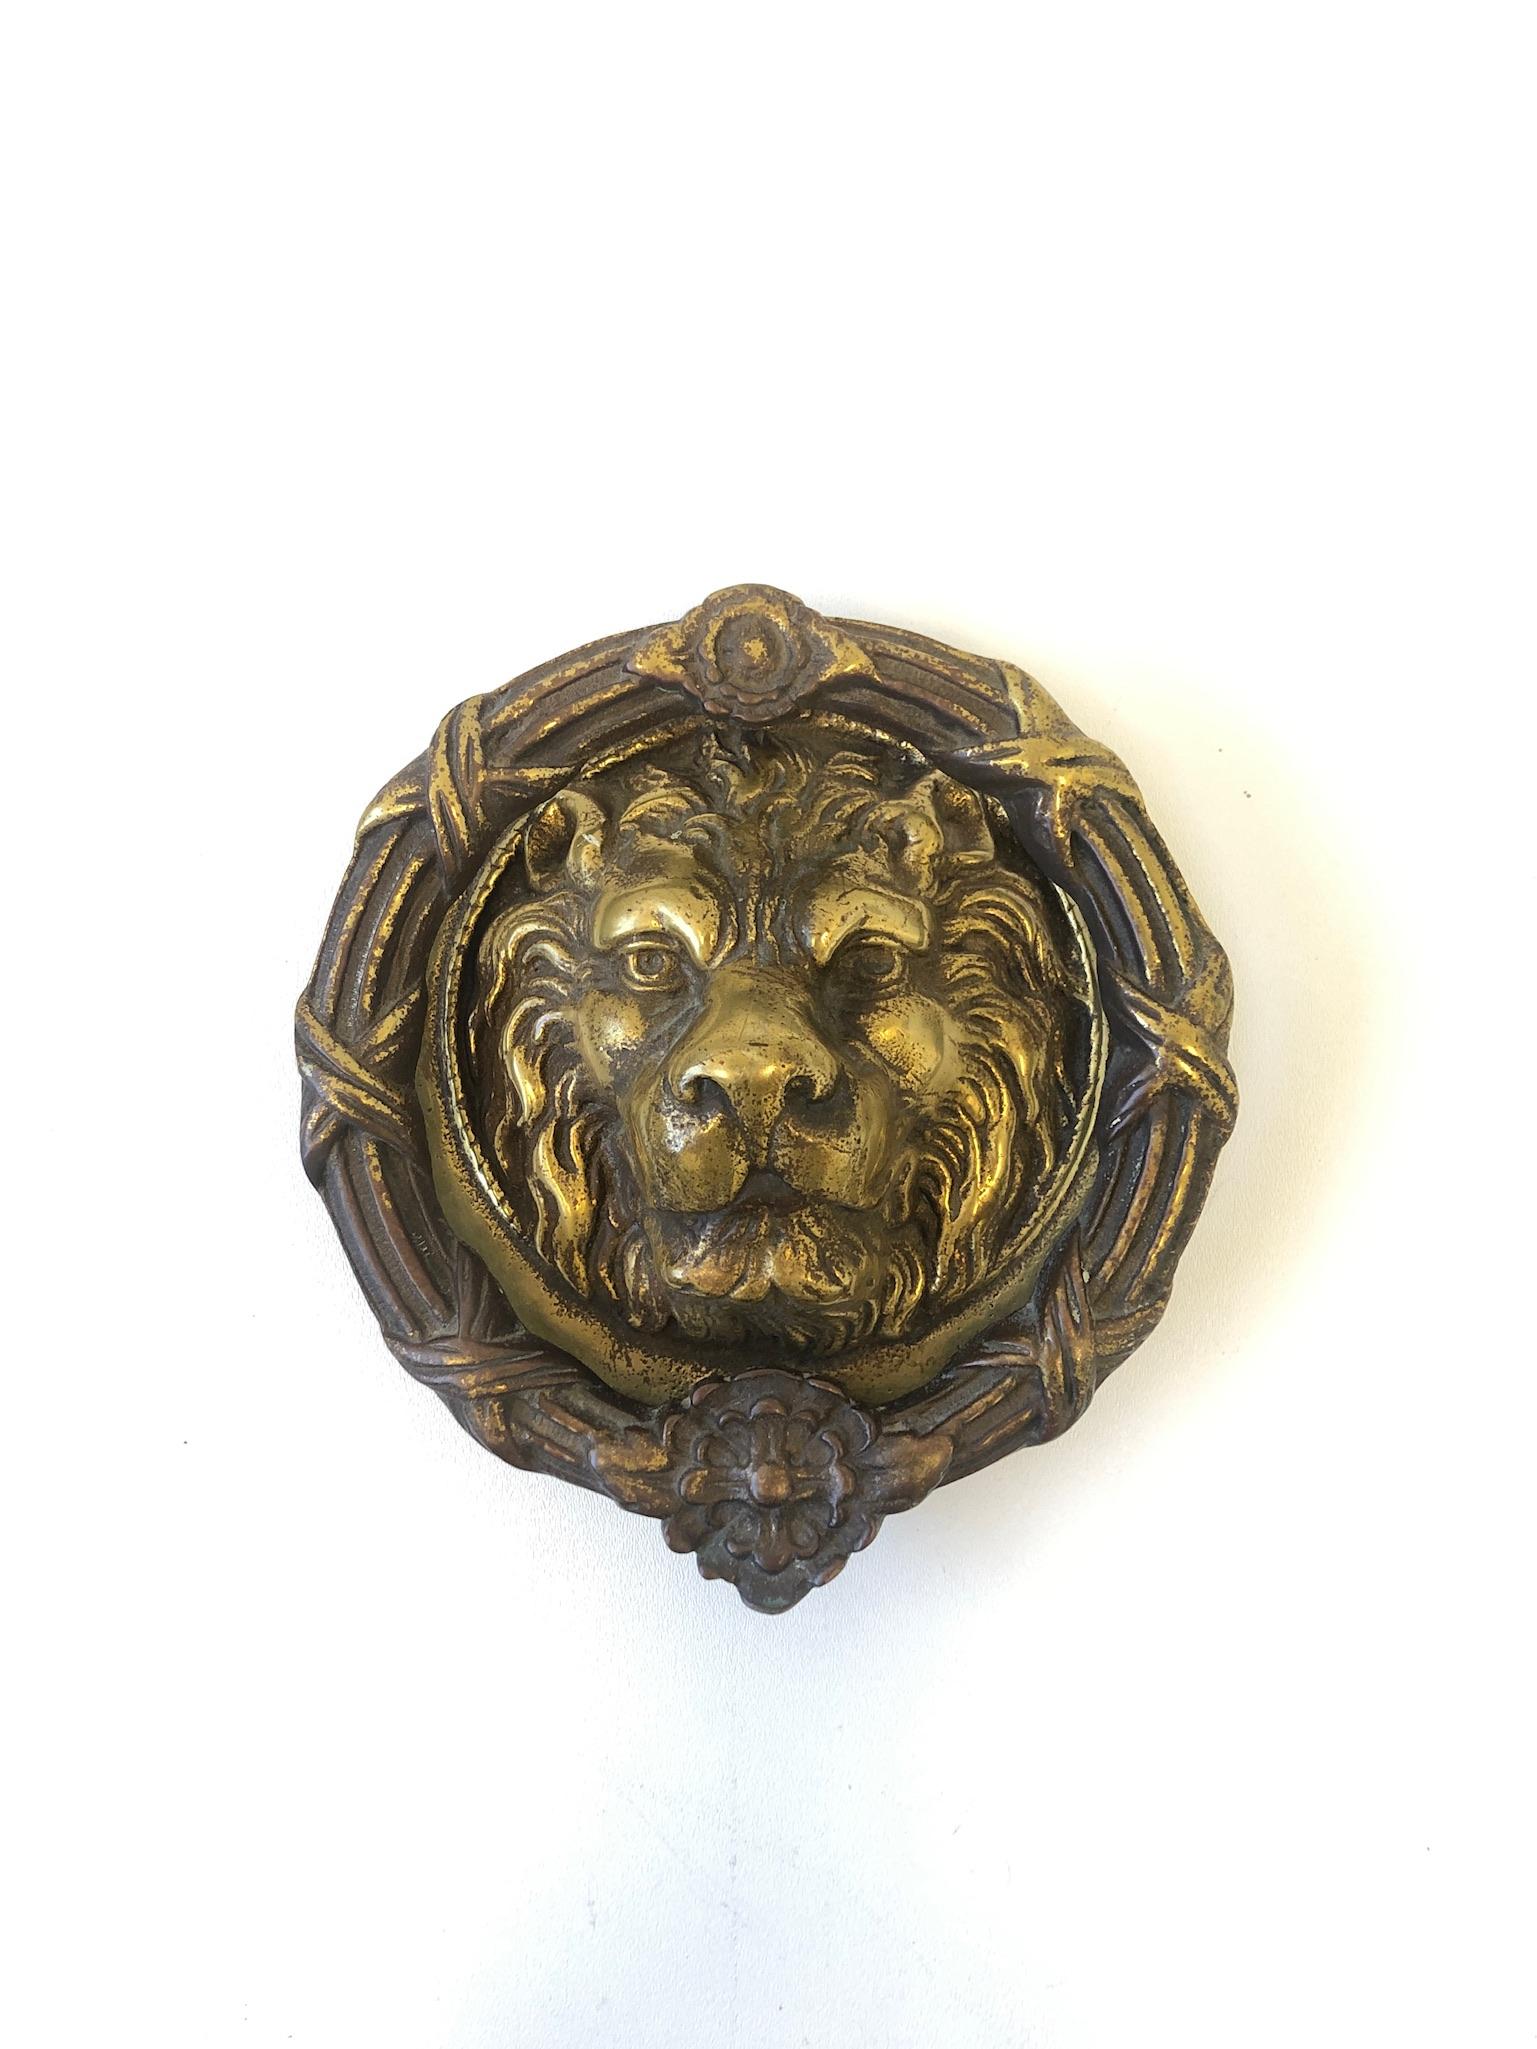 1970s large cast brass Lion head with wreath door knocker.
As found condition with aged brass patina. It can be polished if desired.
Measurements: 9.75” high, 9” wide and 2.75” deep.